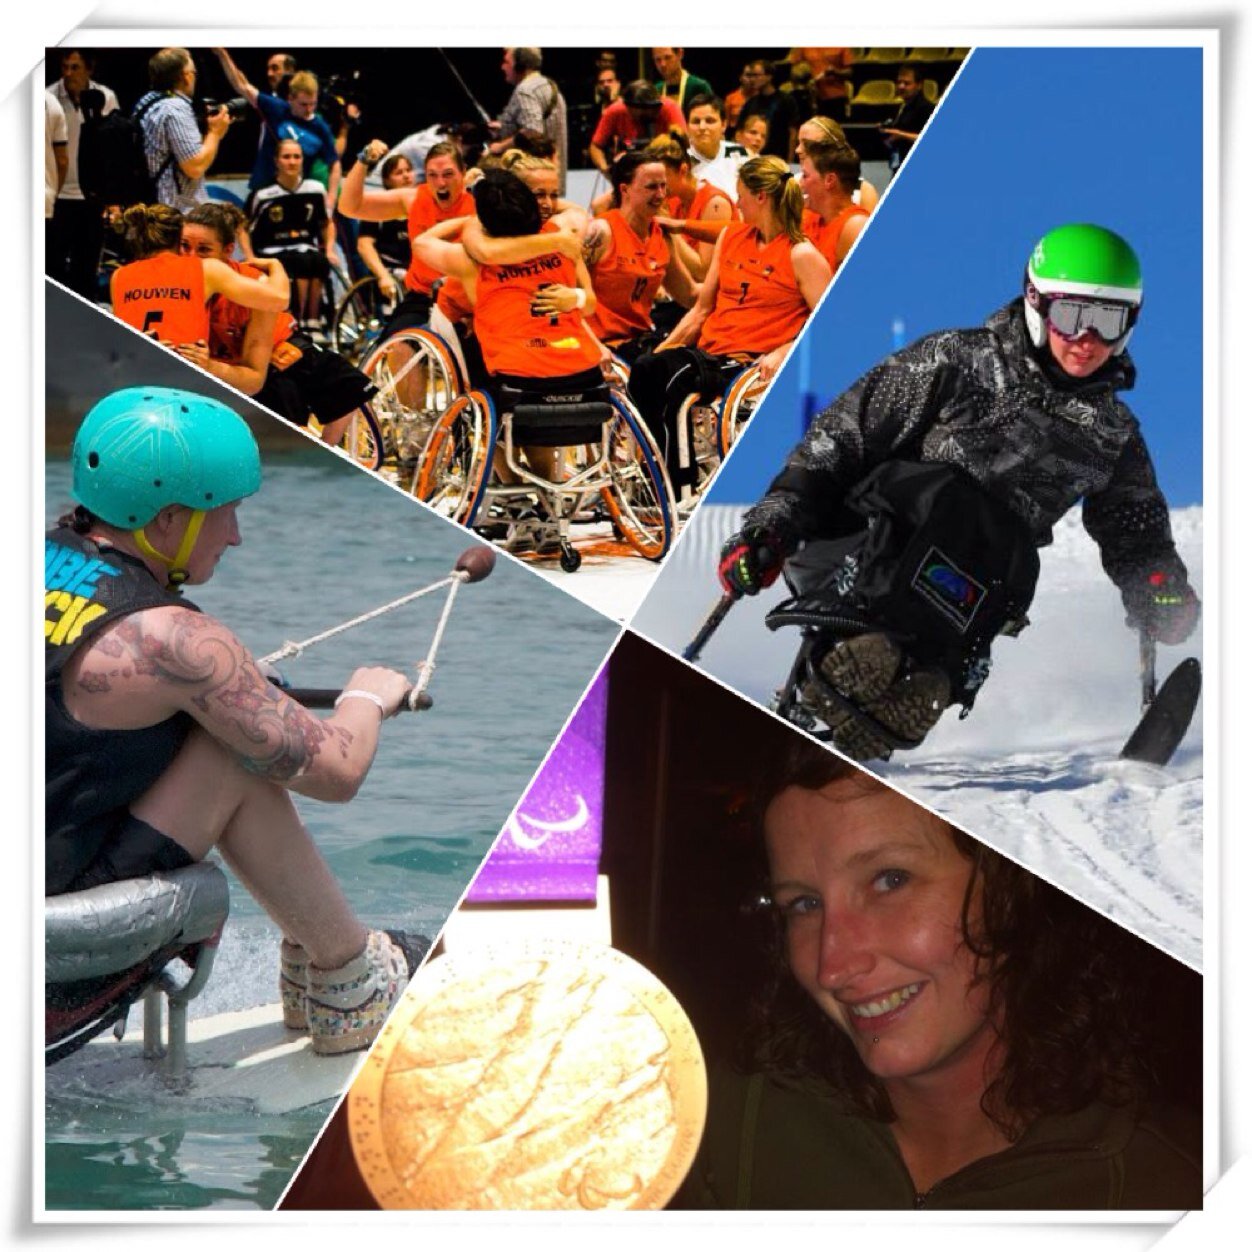 Follow your dream, do more of what you love! Paralympian TeamNL: bronze medal London'12&Rio'16 Wheelchair Basketball | Alpine Sitskiing ParaSkiNL | wakeboarding